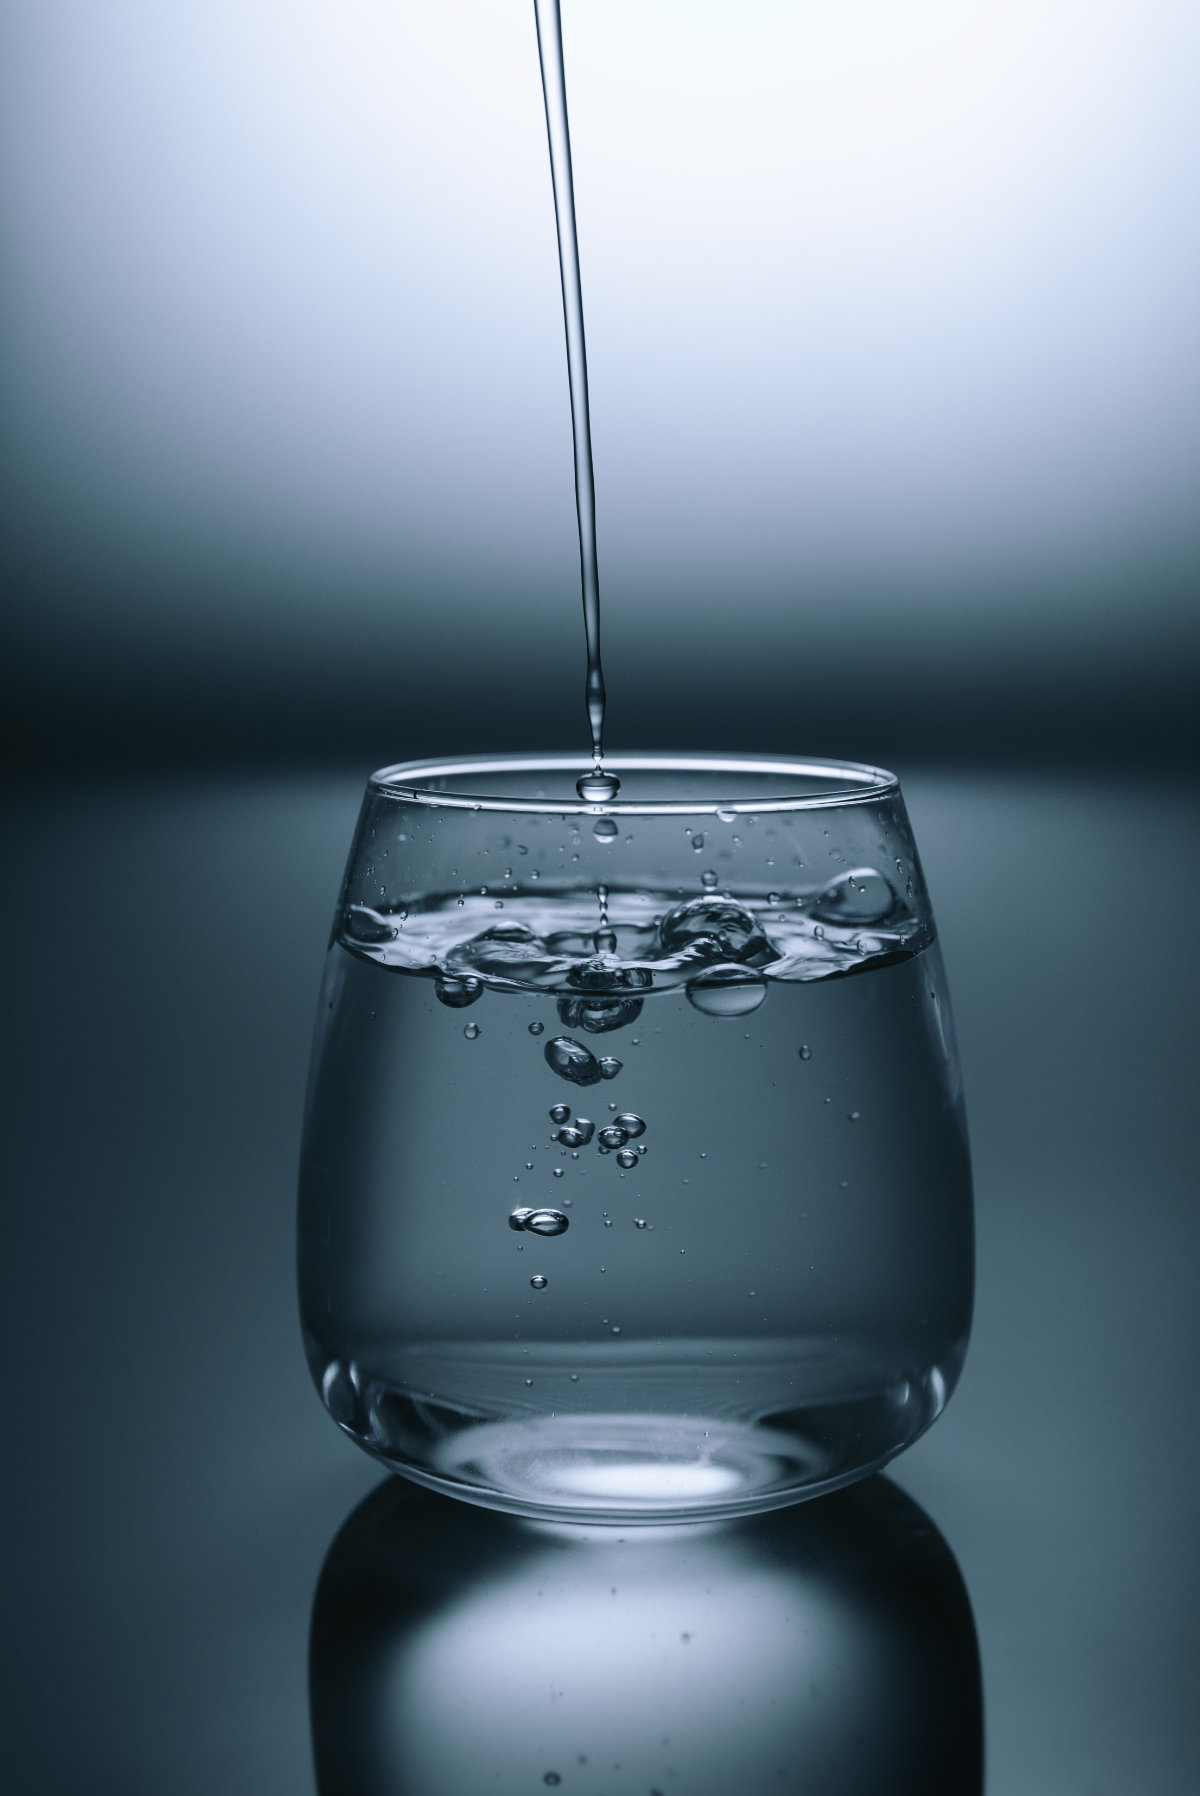 An image of some clear water in a glass